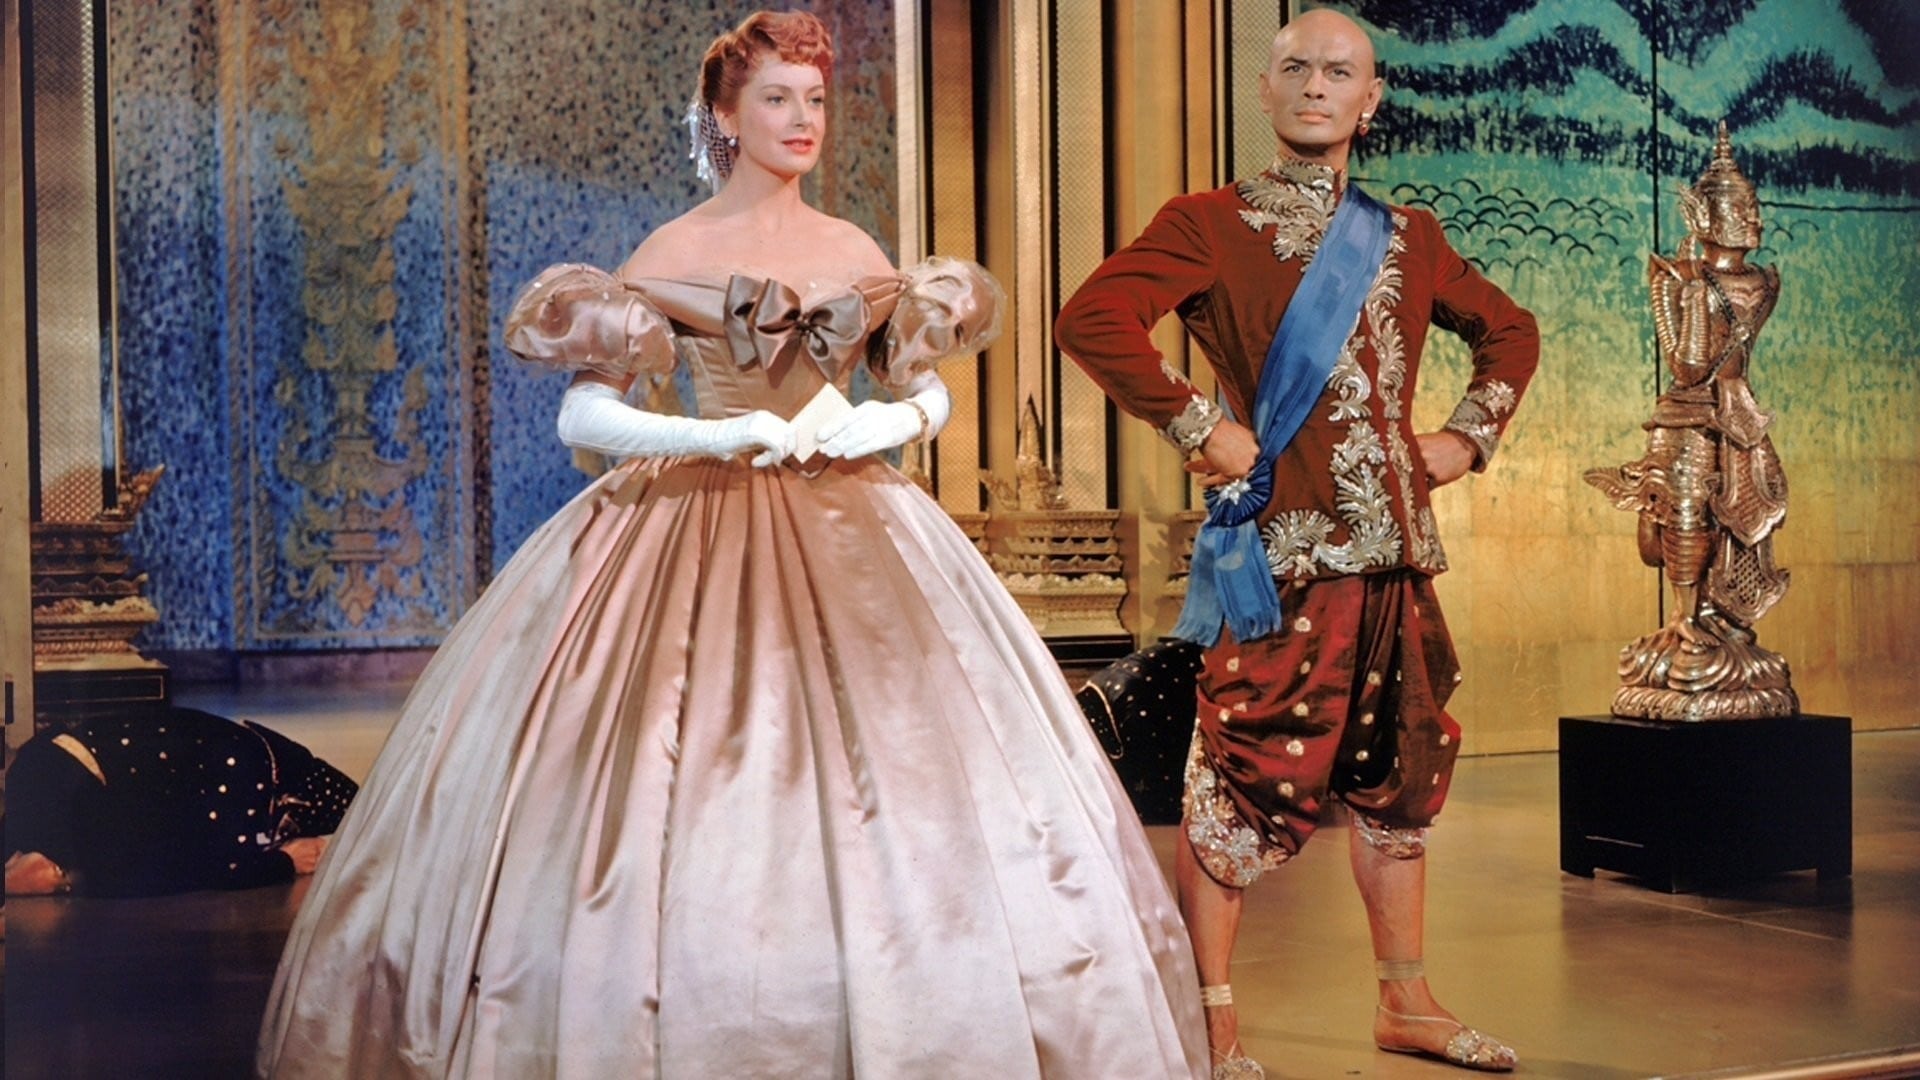 The King and I 1956 123movies